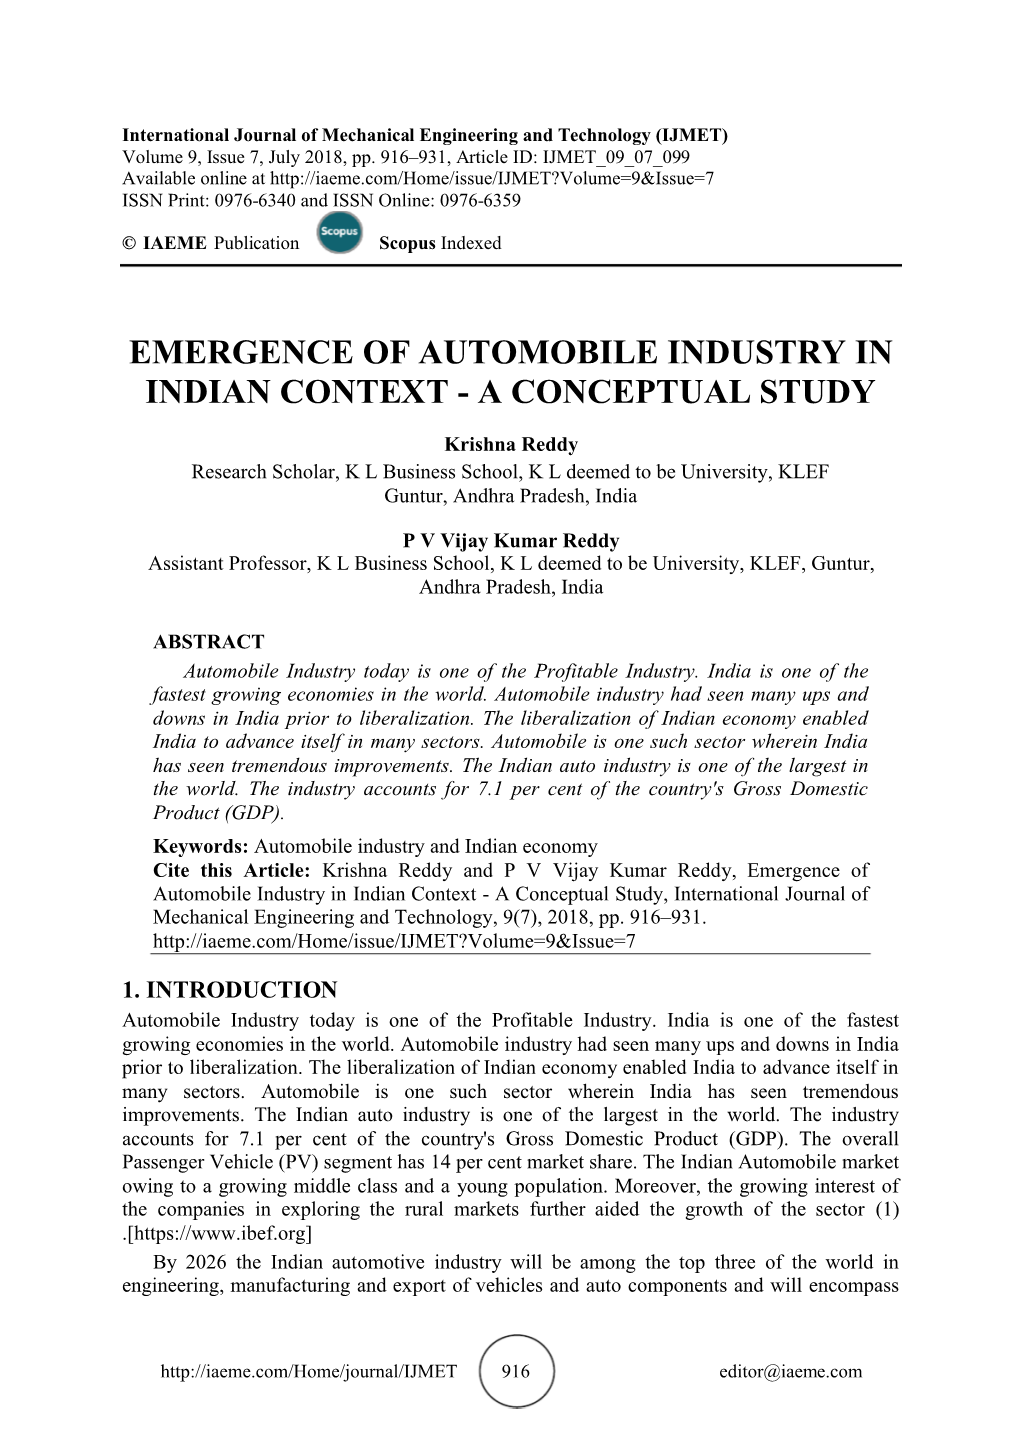 Emergence of Automobile Industry in Indian Context - a Conceptual Study